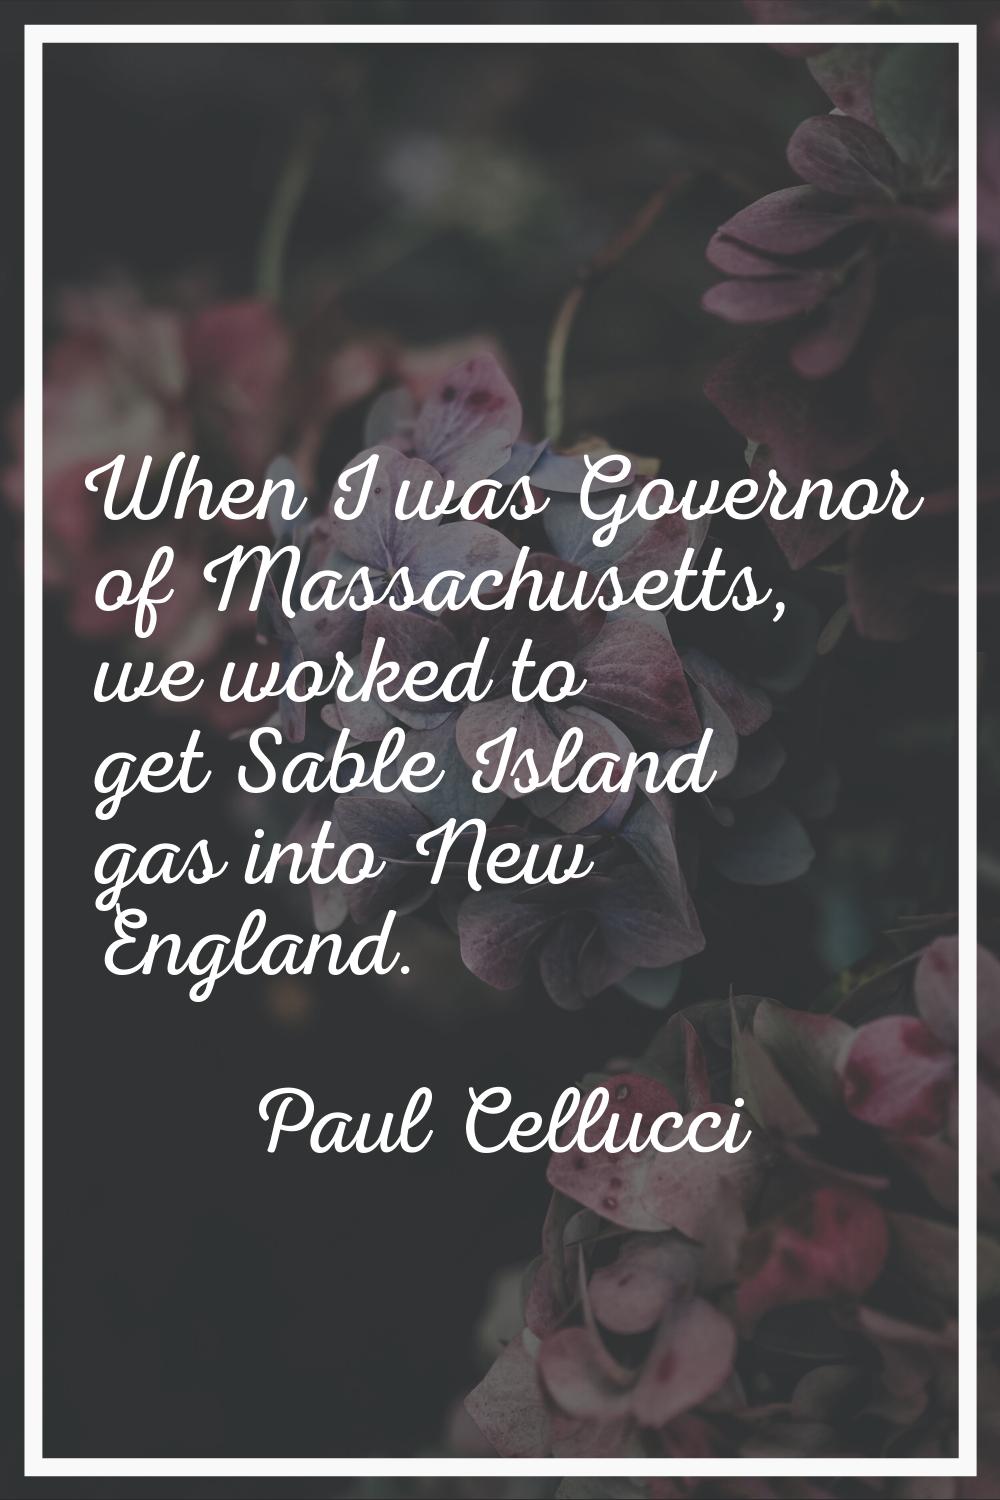 When I was Governor of Massachusetts, we worked to get Sable Island gas into New England.